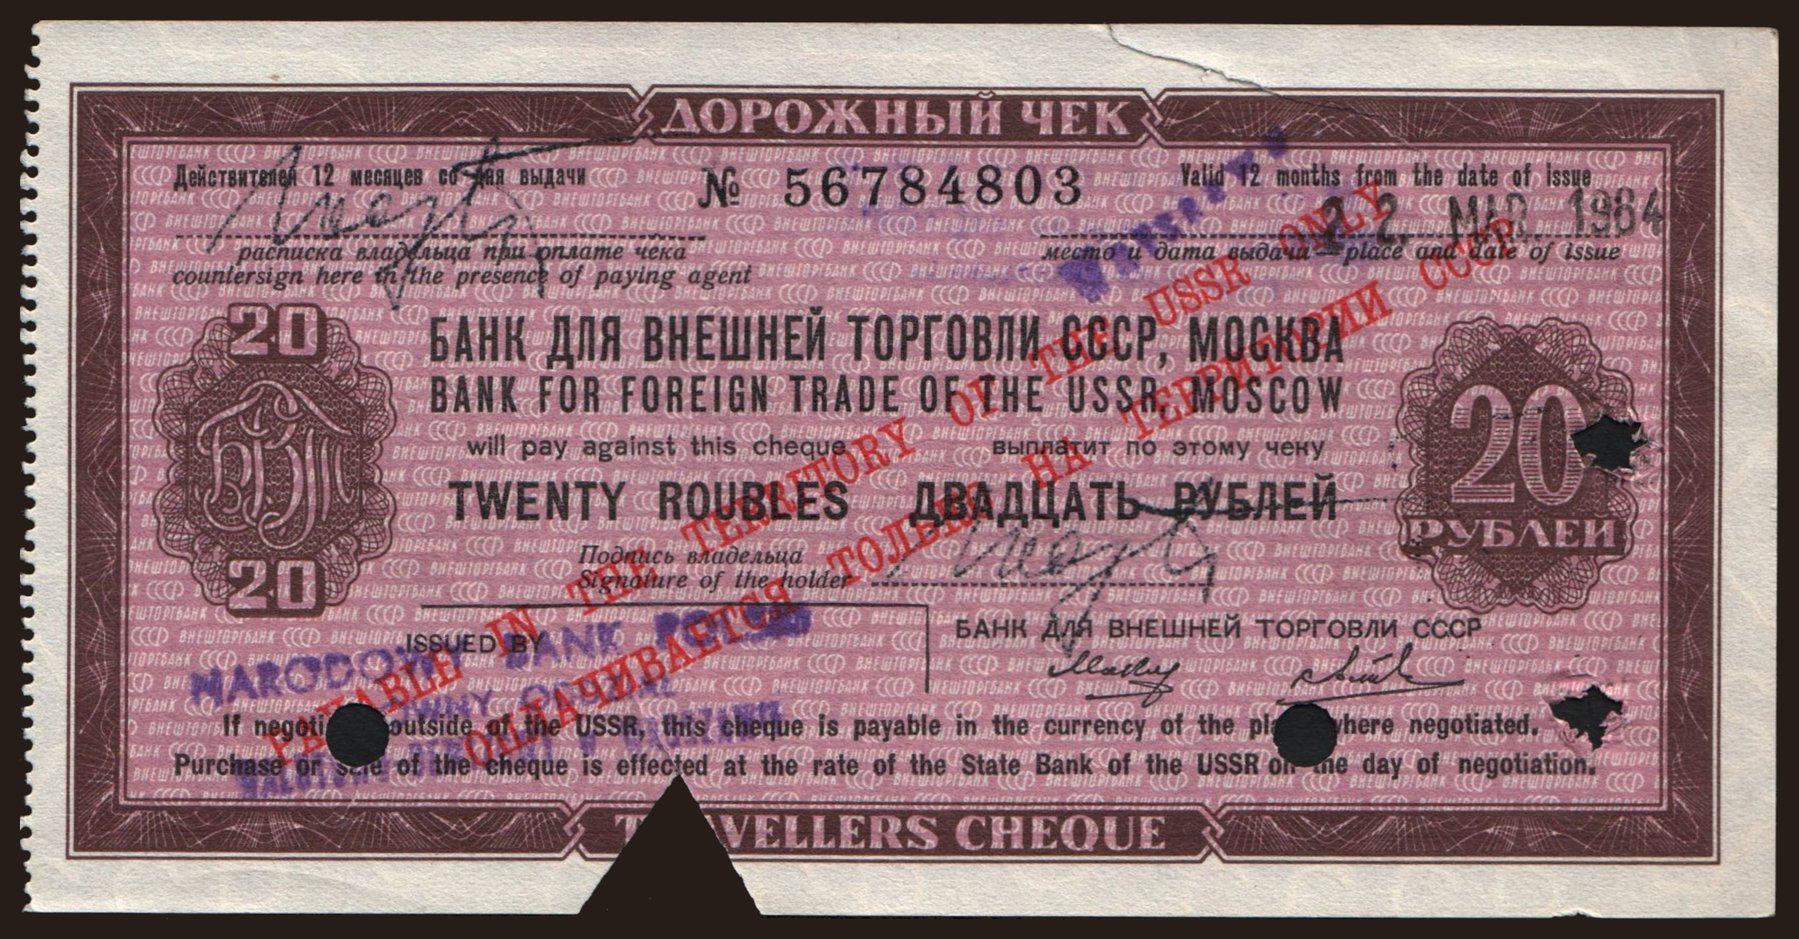 Travellers cheque, Bank for Foreign Trade, 20 rubel, 1984